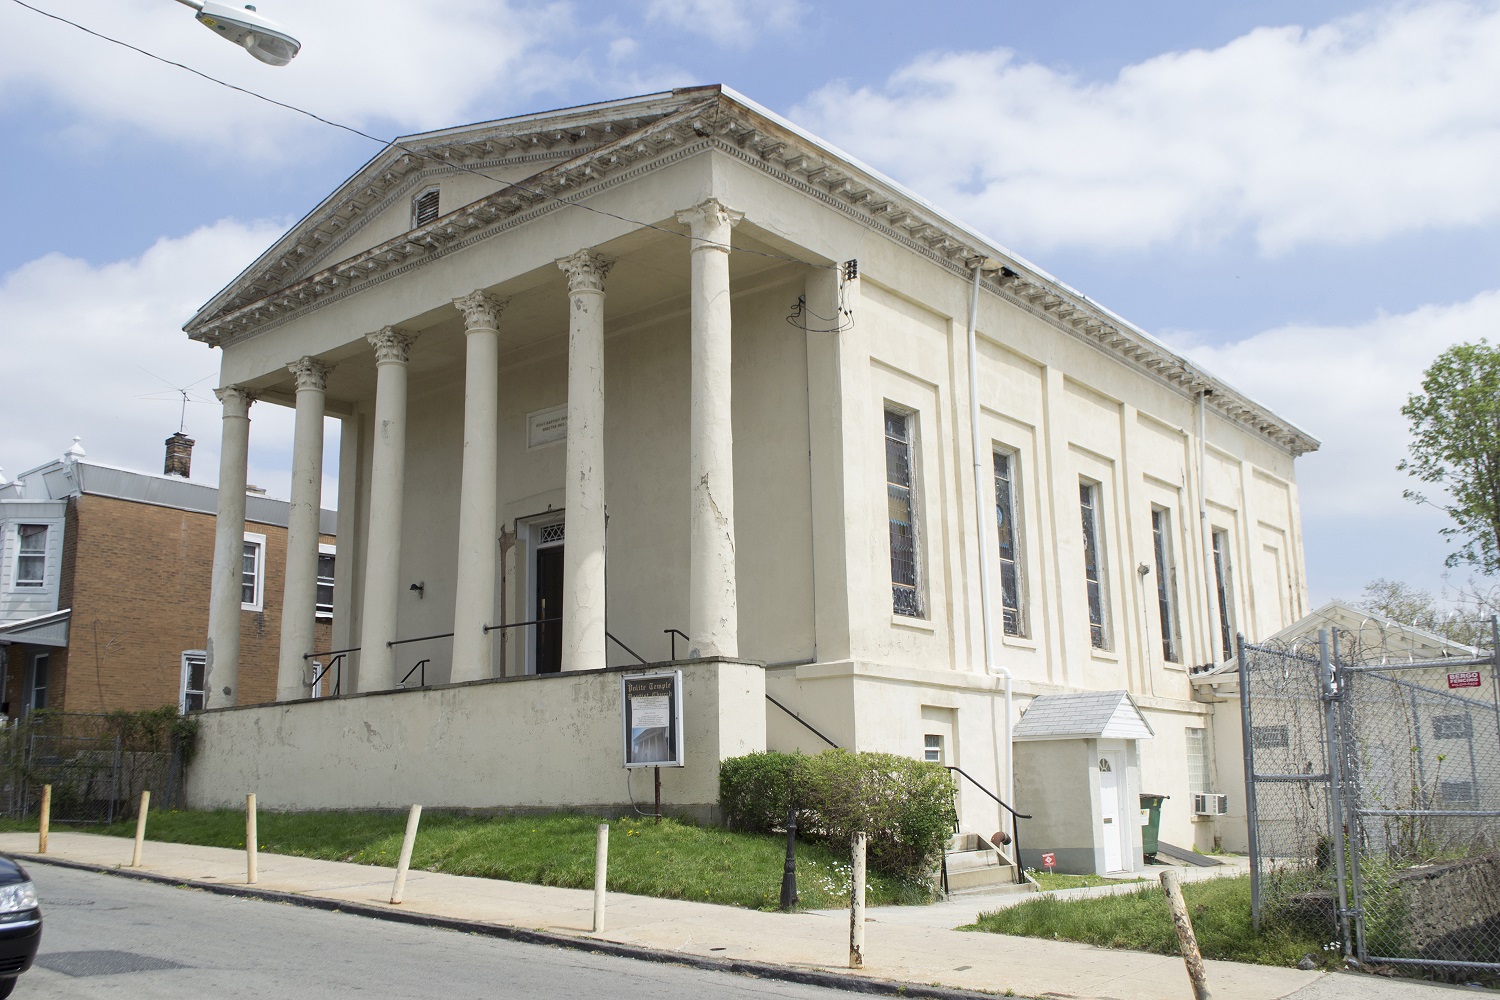 Large white building with six large, two-story columns along the street that support a triangular pediment. Stained glass windows line the side wall.